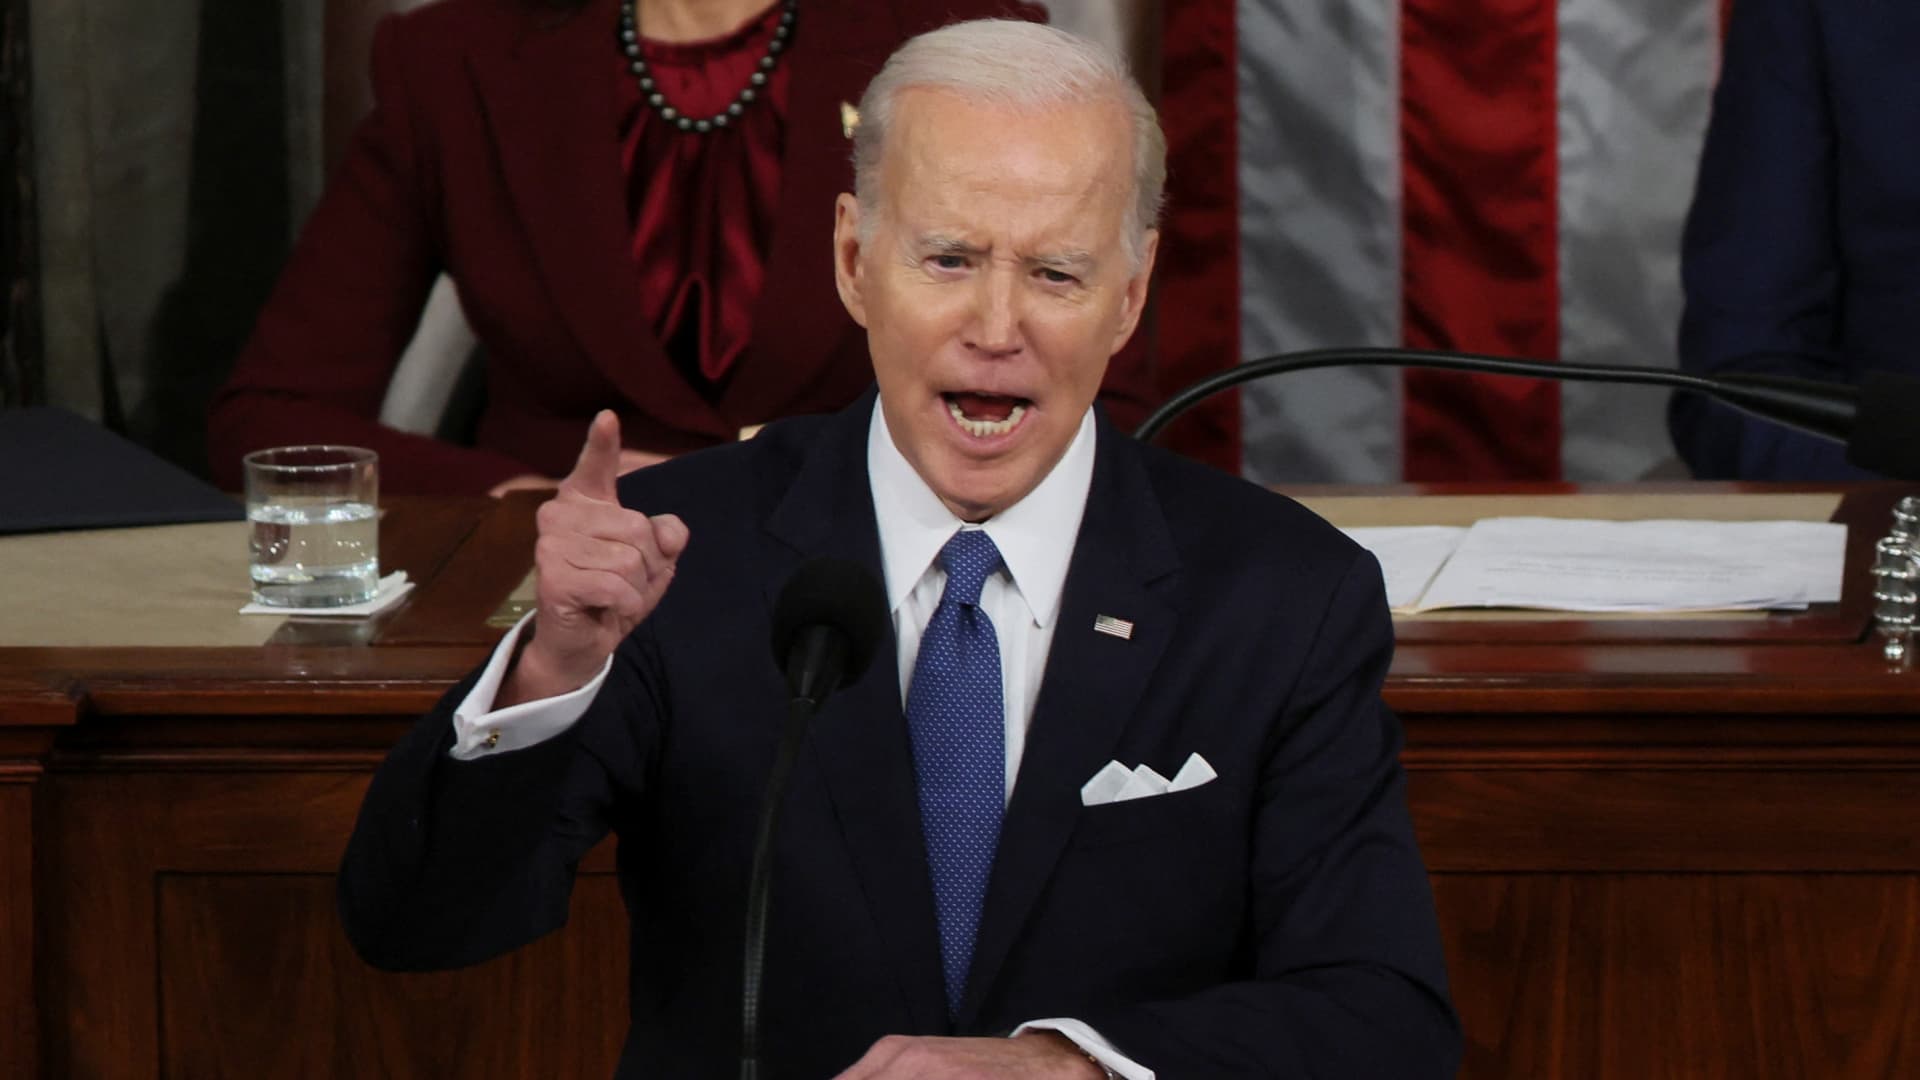 Biden's billionaire tax is 'dead on arrival' in Congress, top Wall Street backers and Democratic strategists say